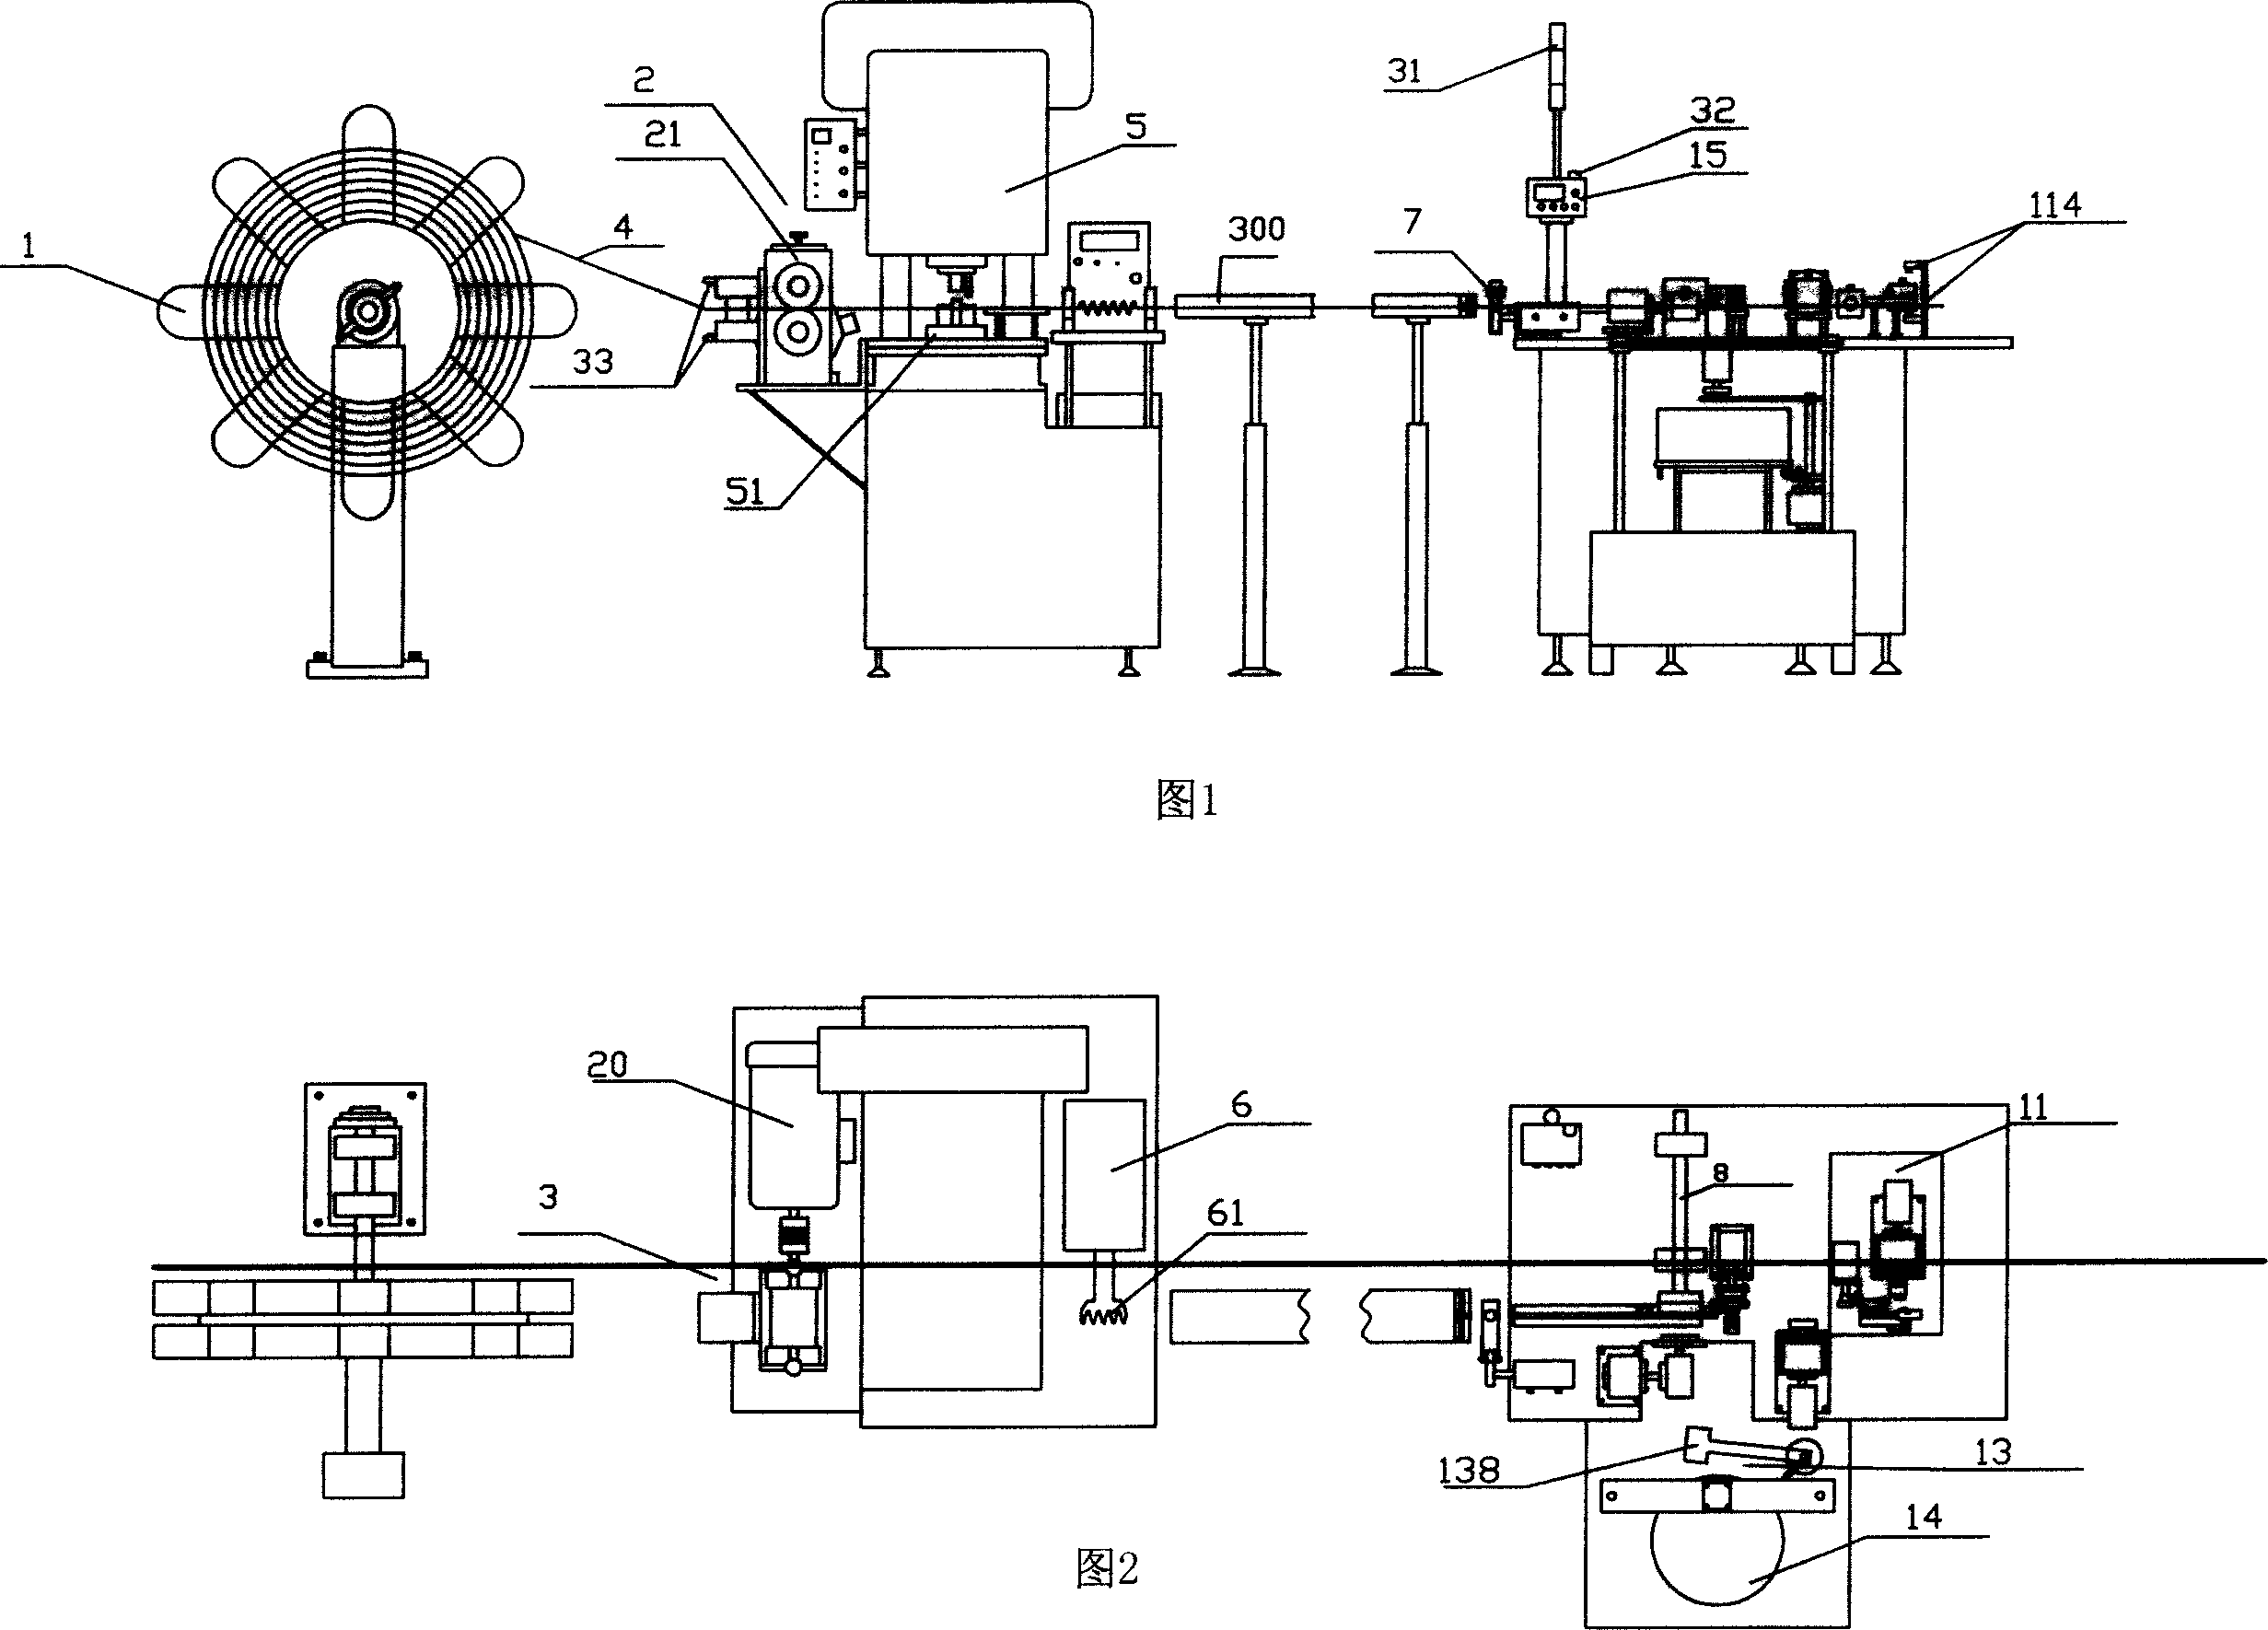 Automatic scroll spring forming apparatus